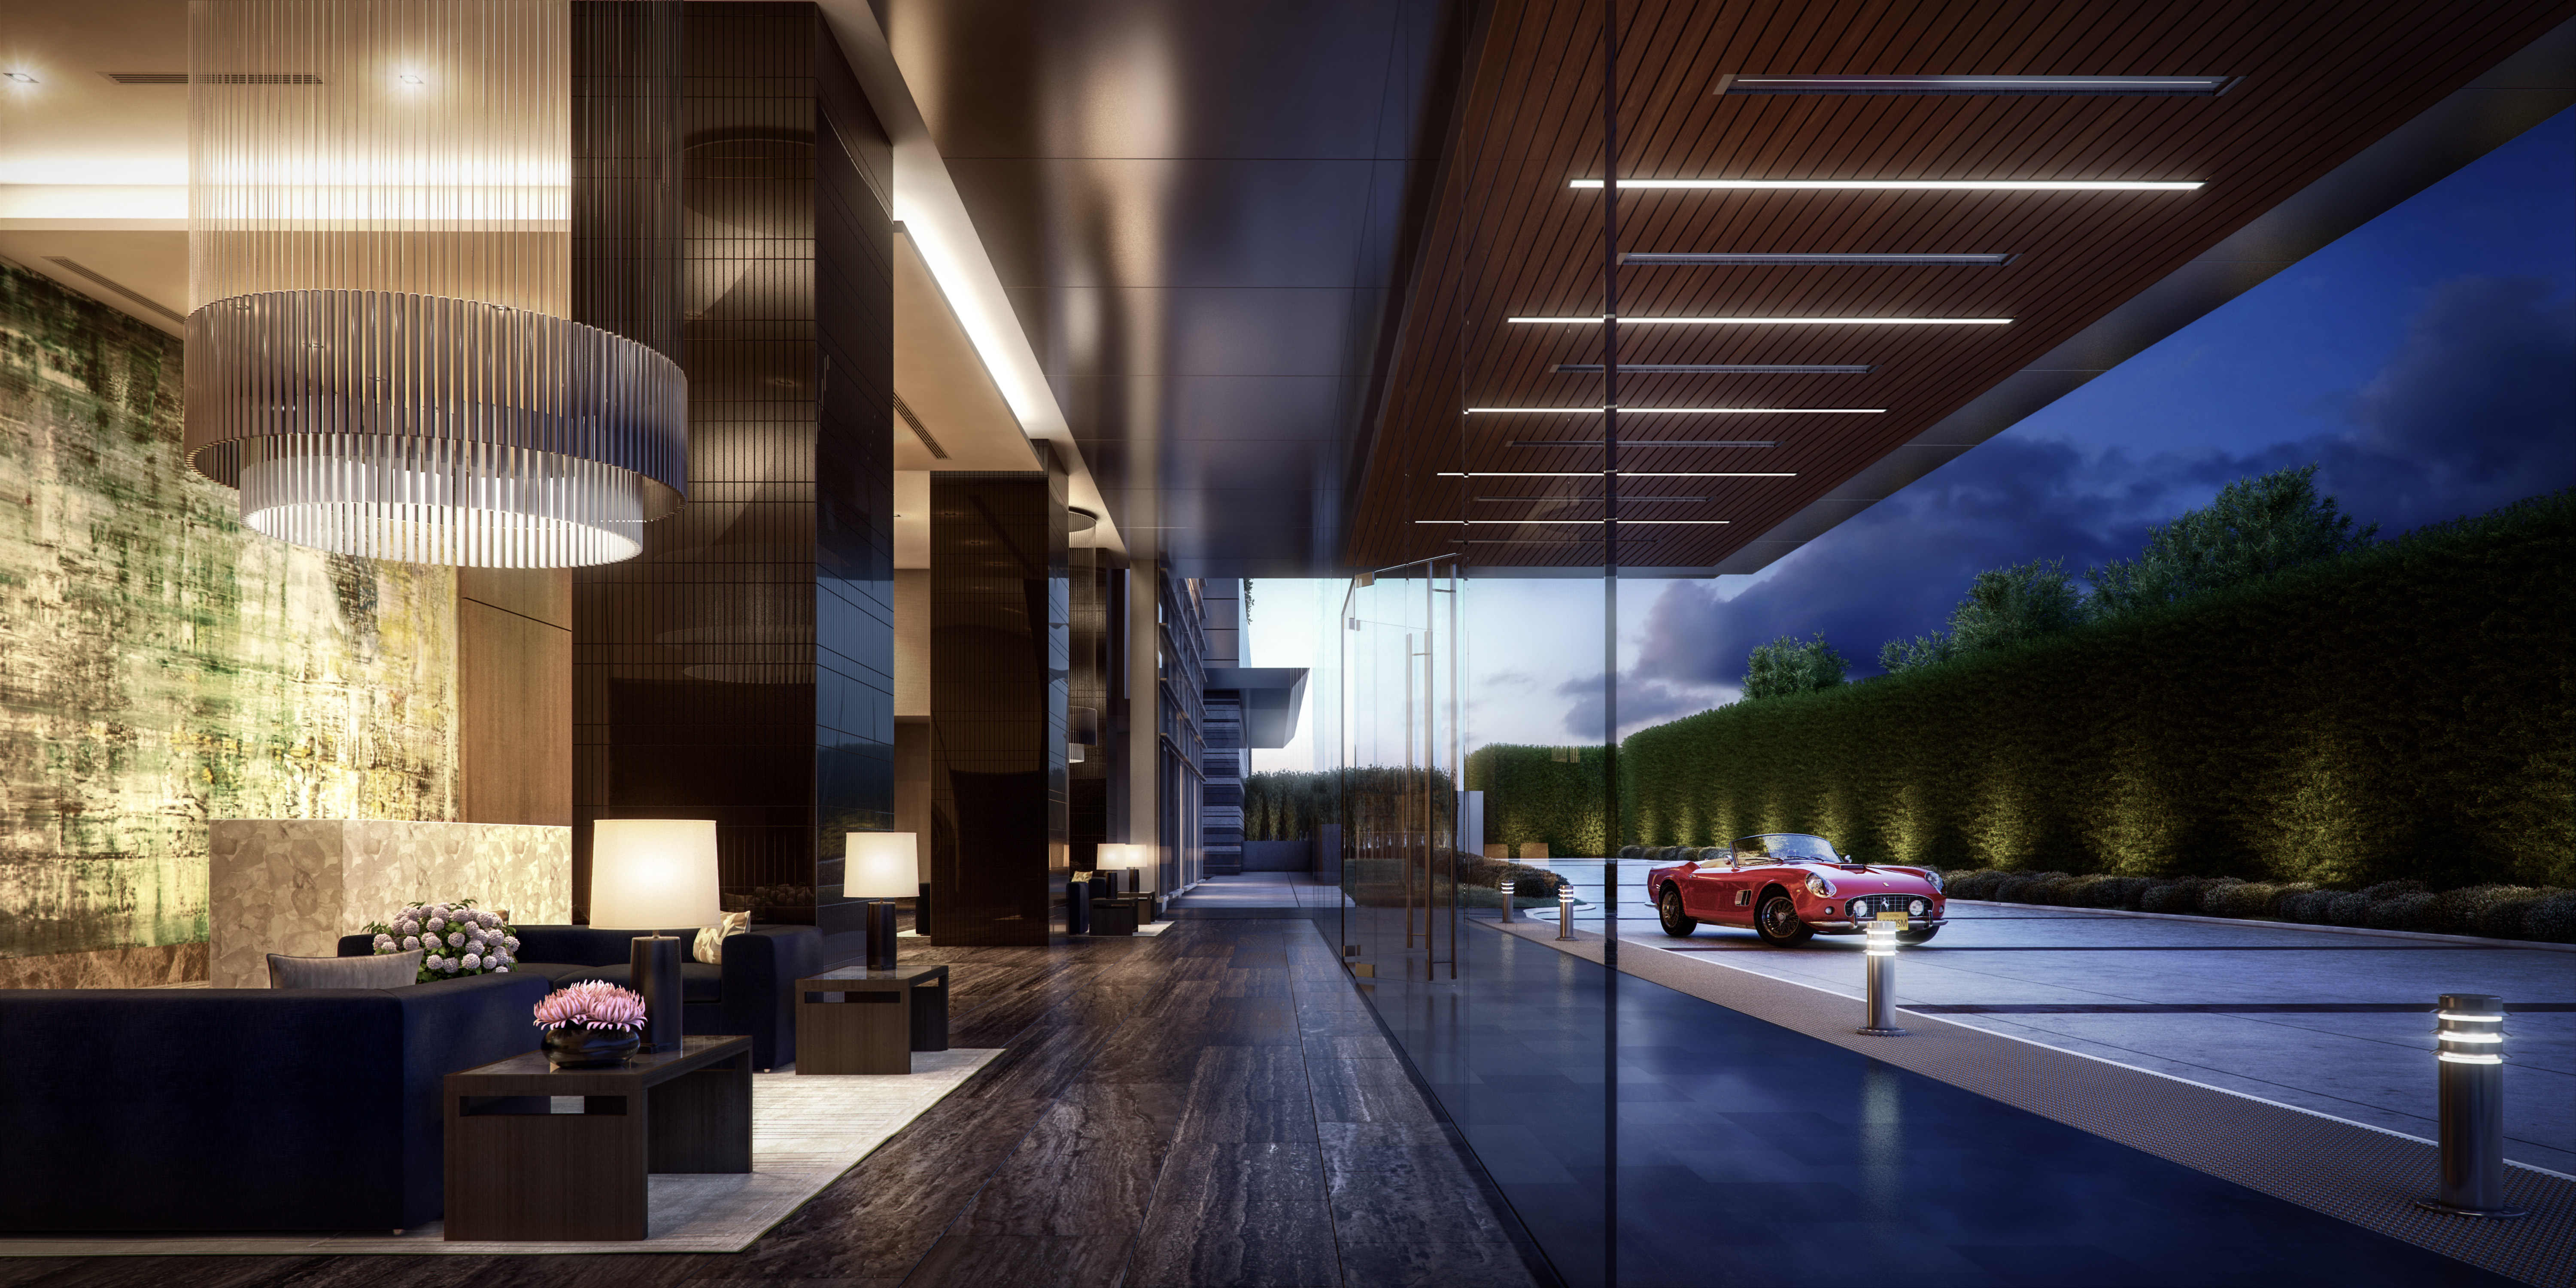 A rendering of the lobby